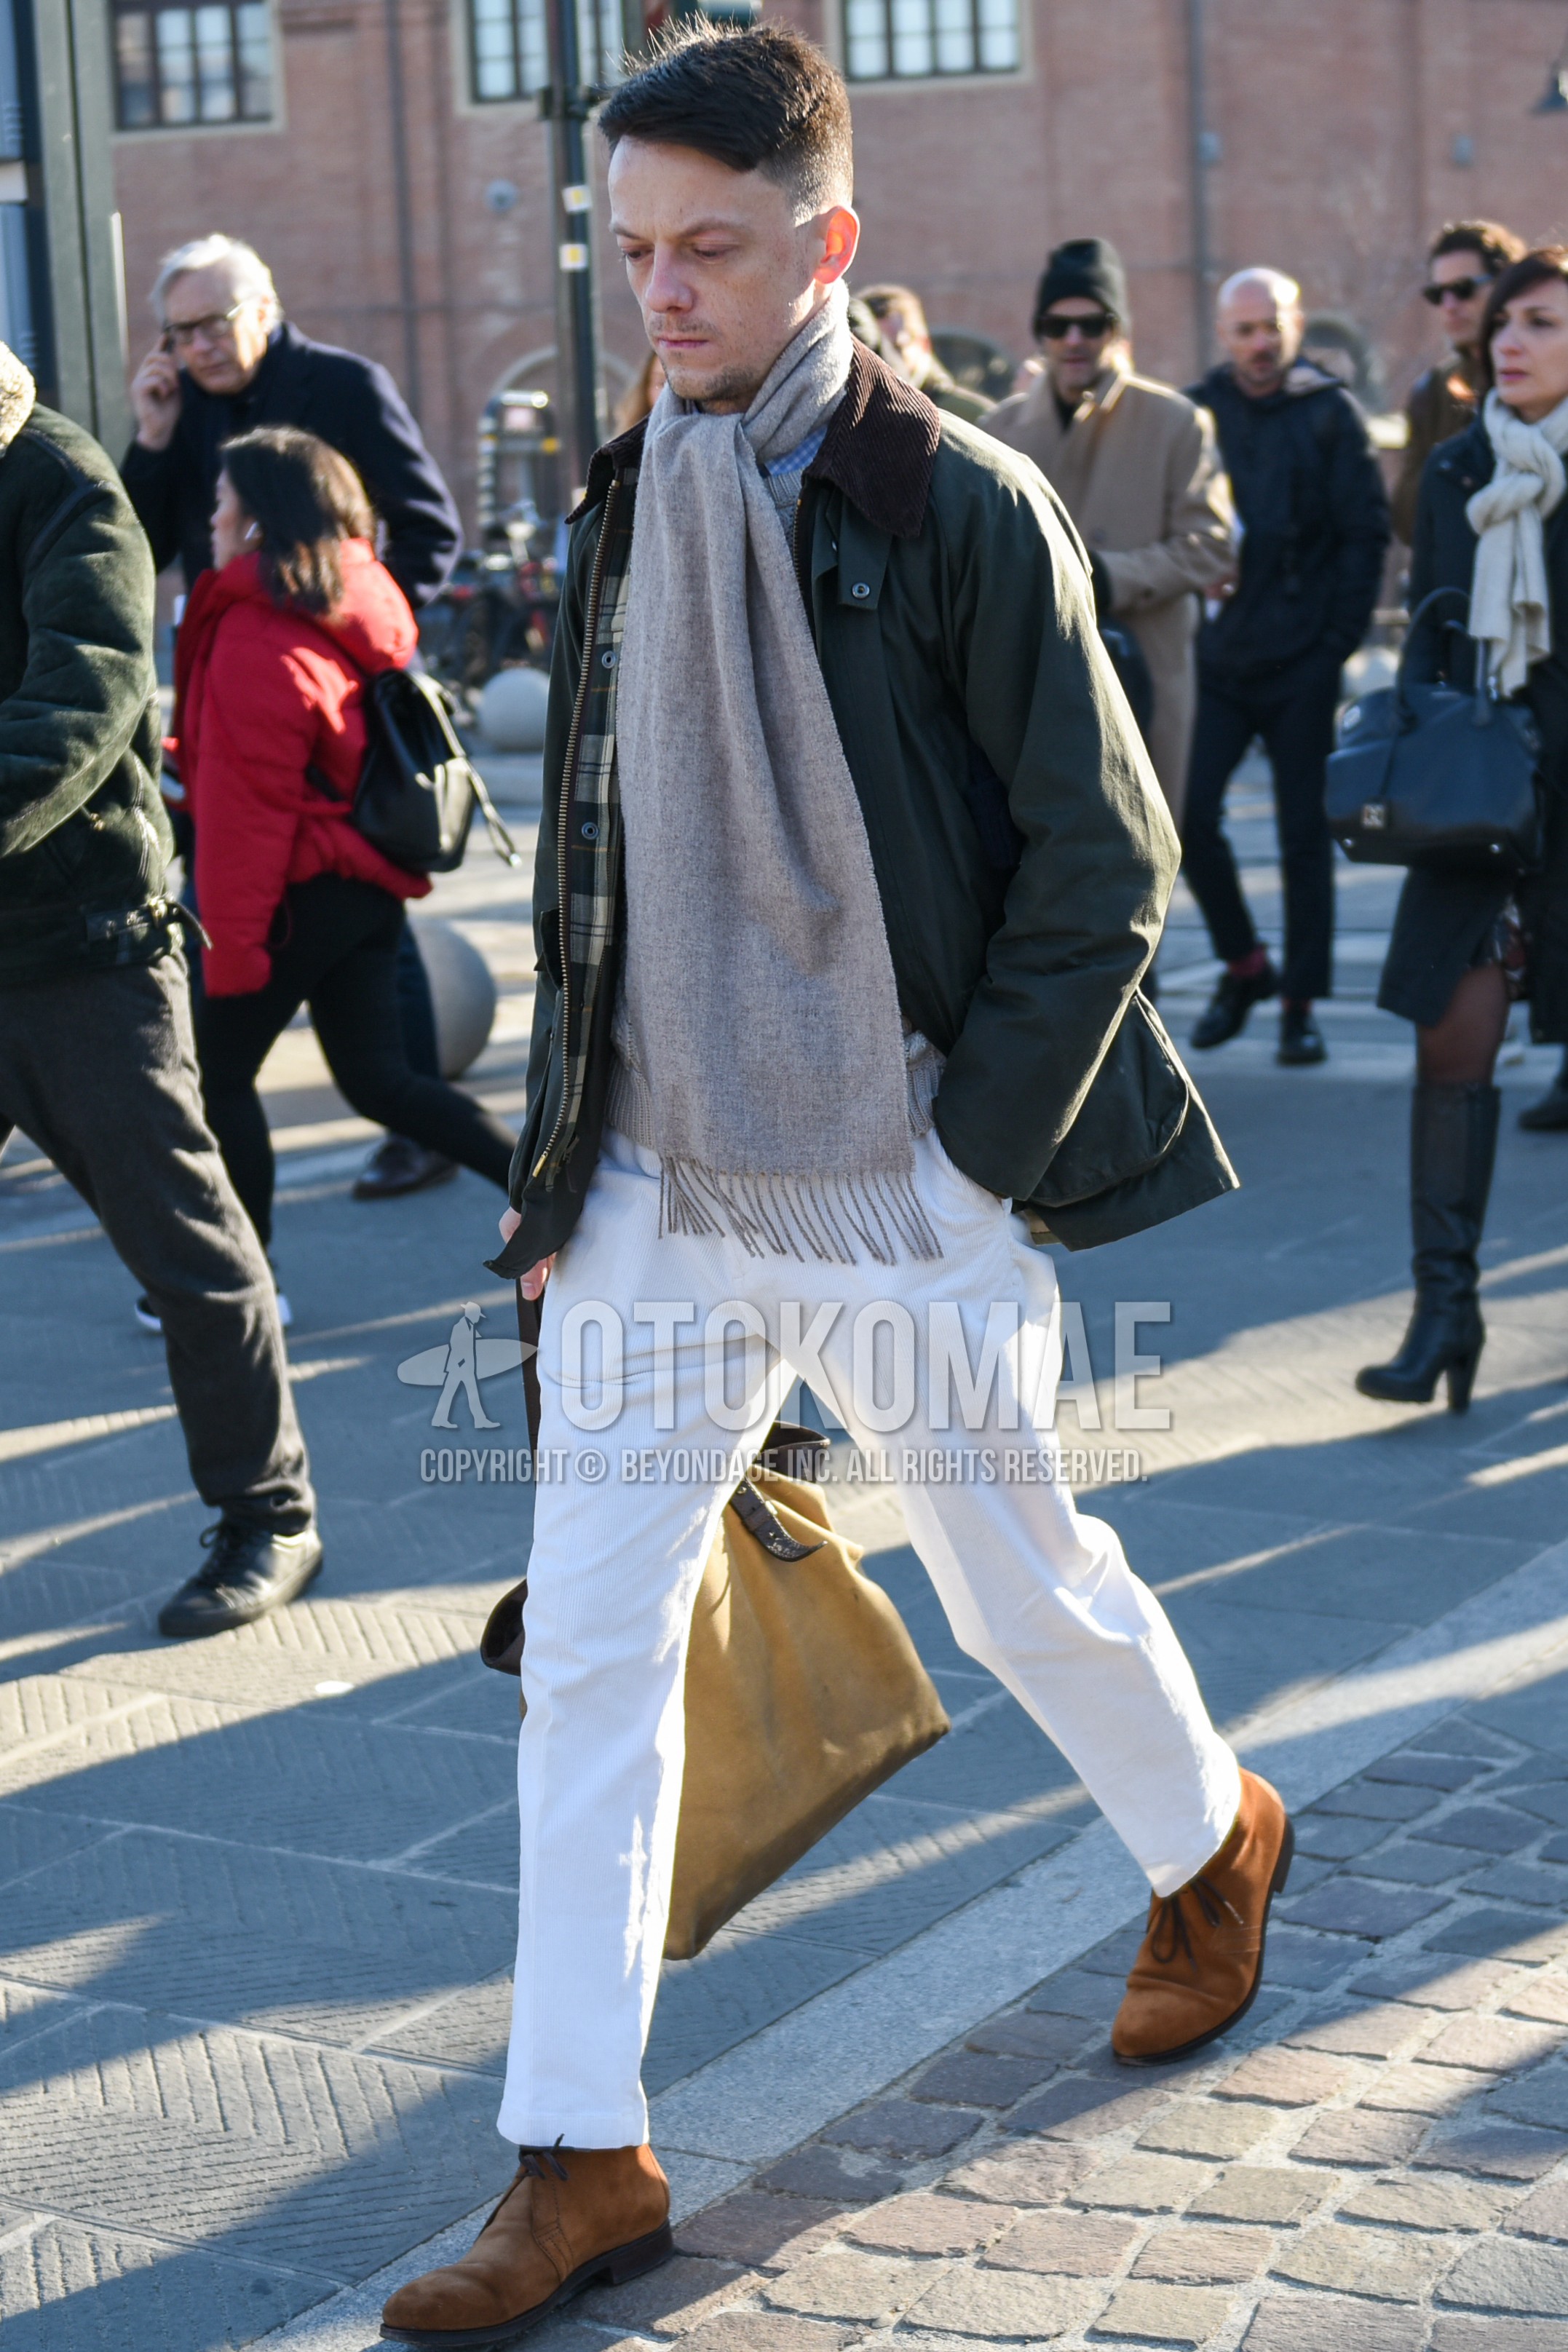 Men's autumn winter outfit with gray plain scarf, olive green plain field jacket/hunting jacket, white plain cotton pants, brown chukka boots.